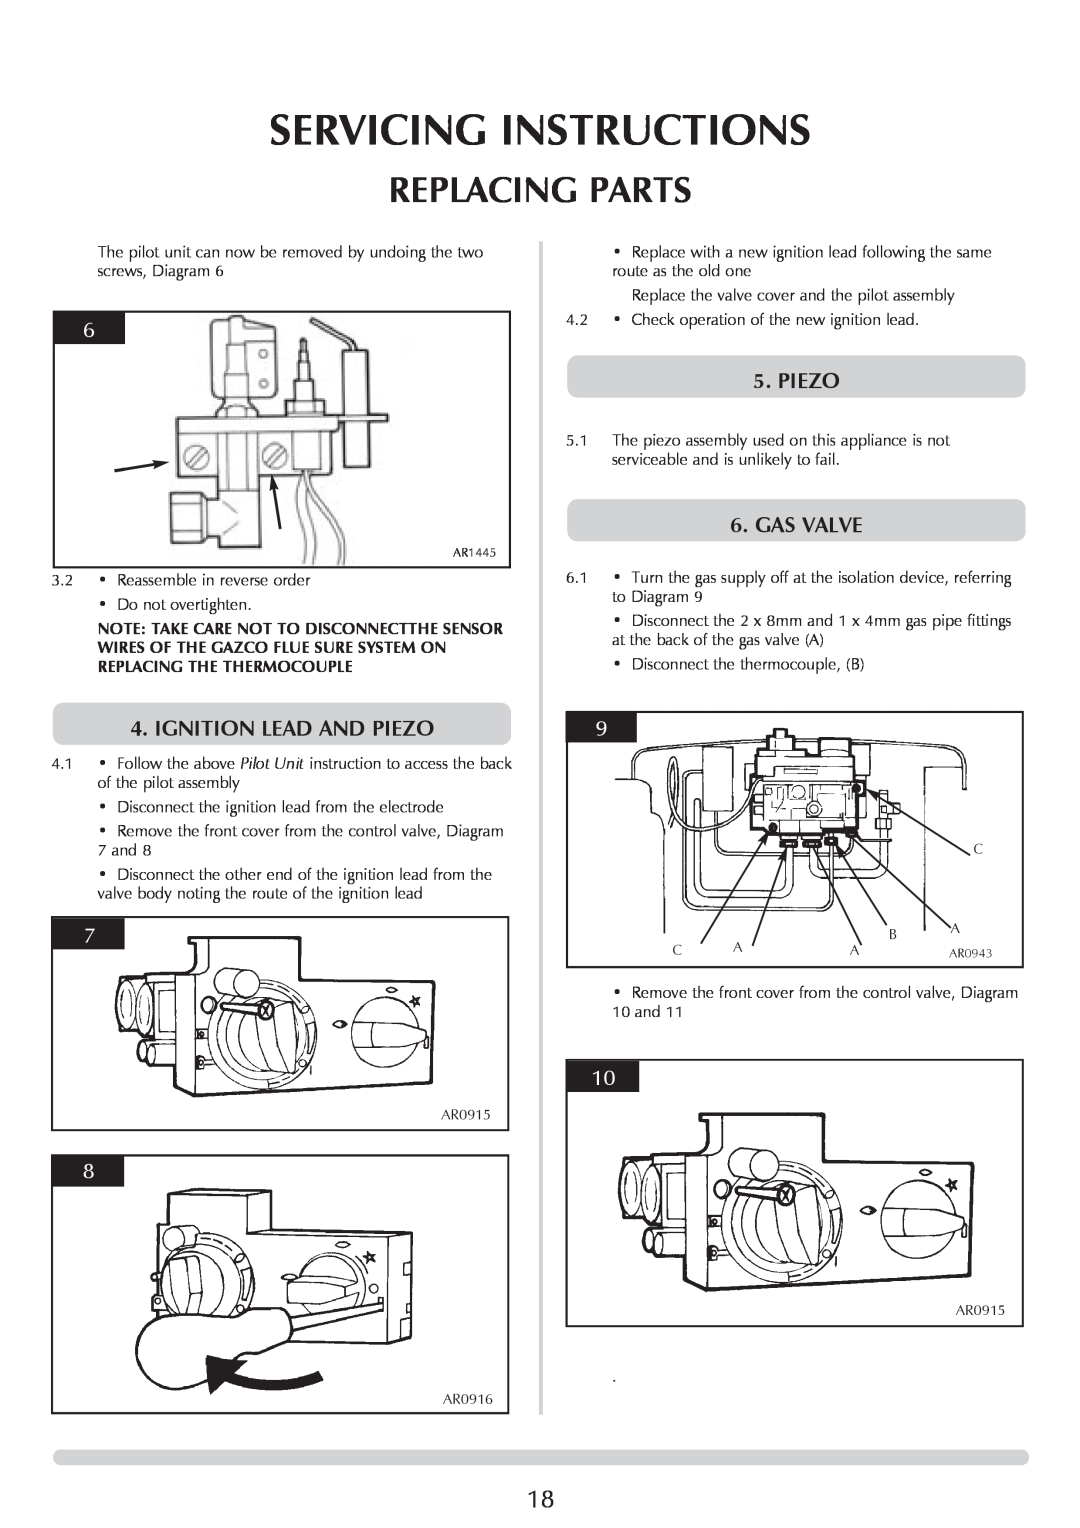 Stovax Huntingdon 30 manual Servicing Instructions, Replacing Parts, Ignition Lead And Piezo, Gas Valve 